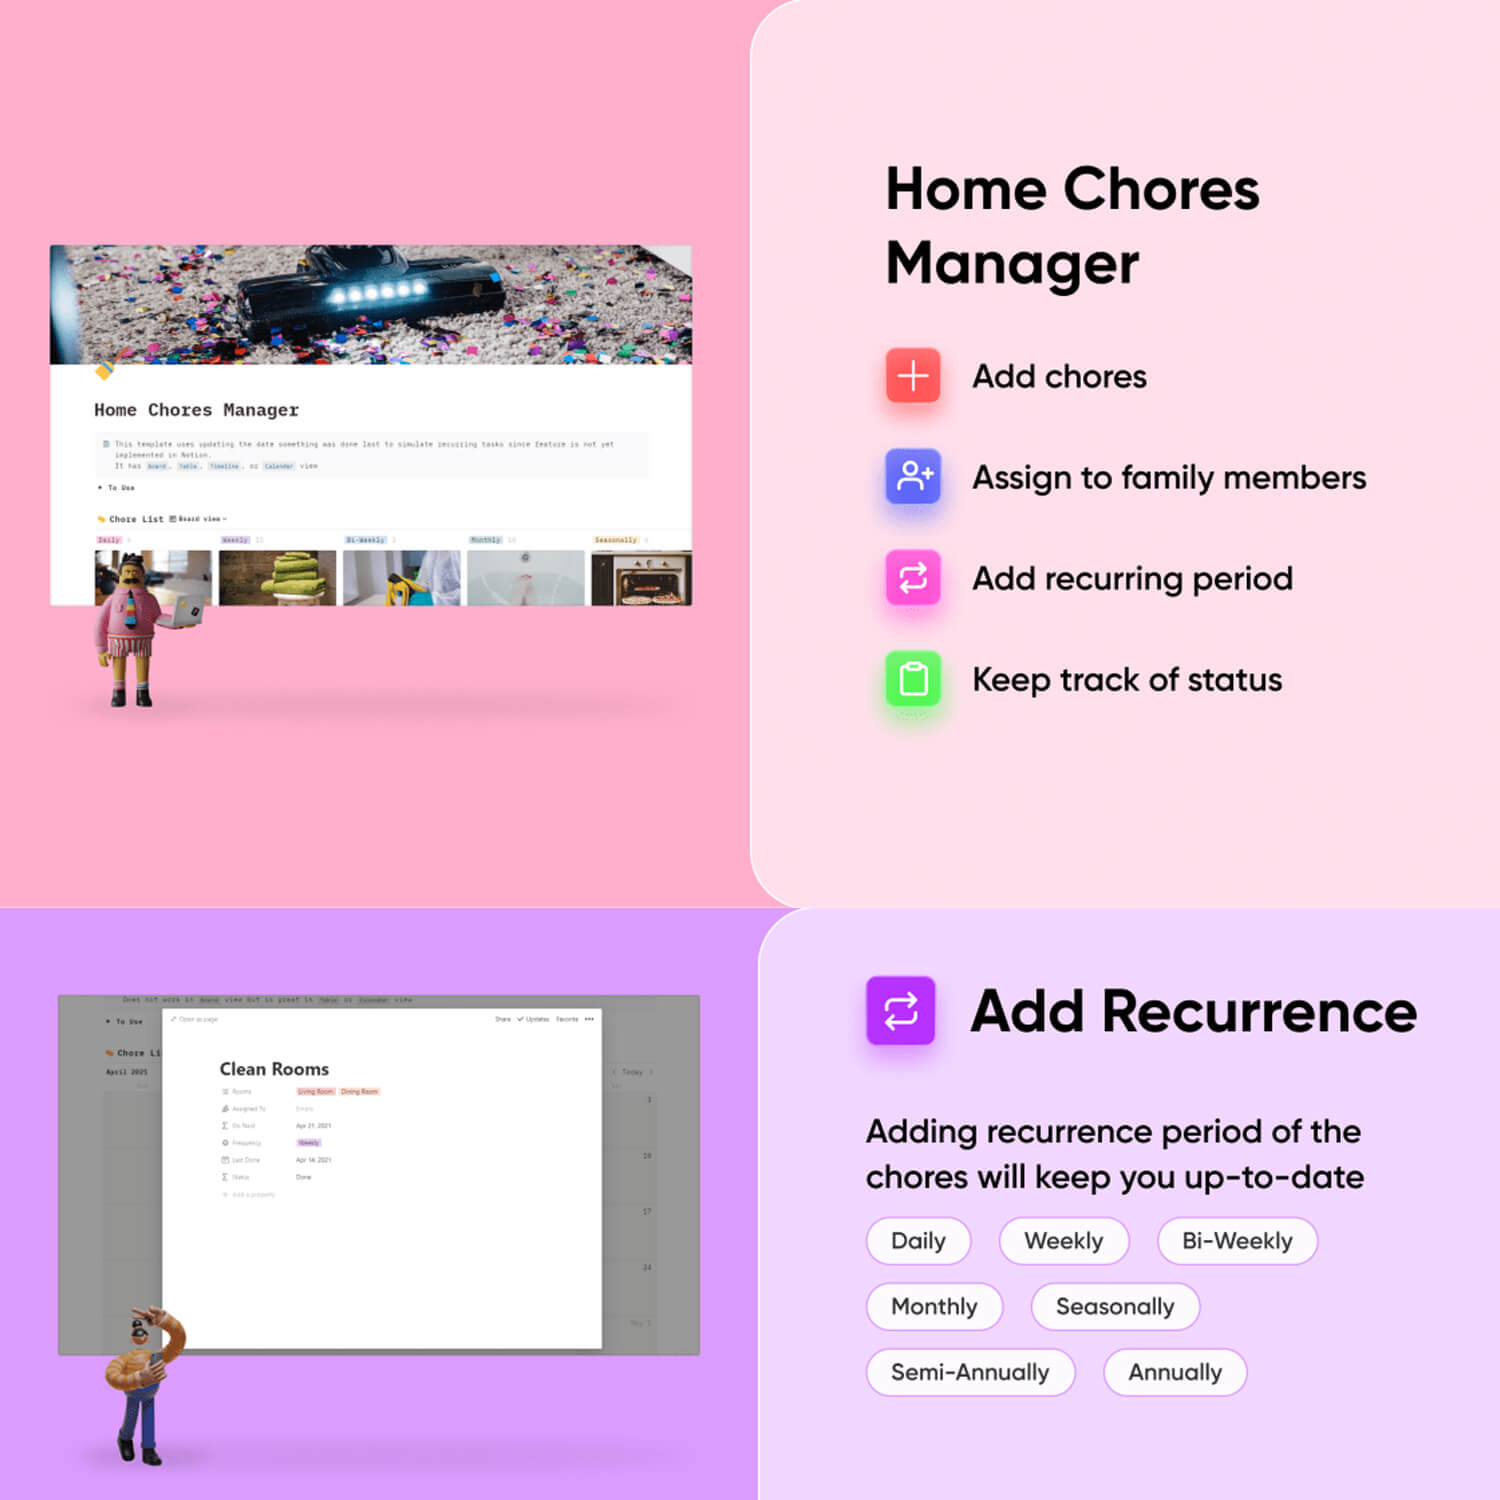 Preview Home chores manager on the presentation.